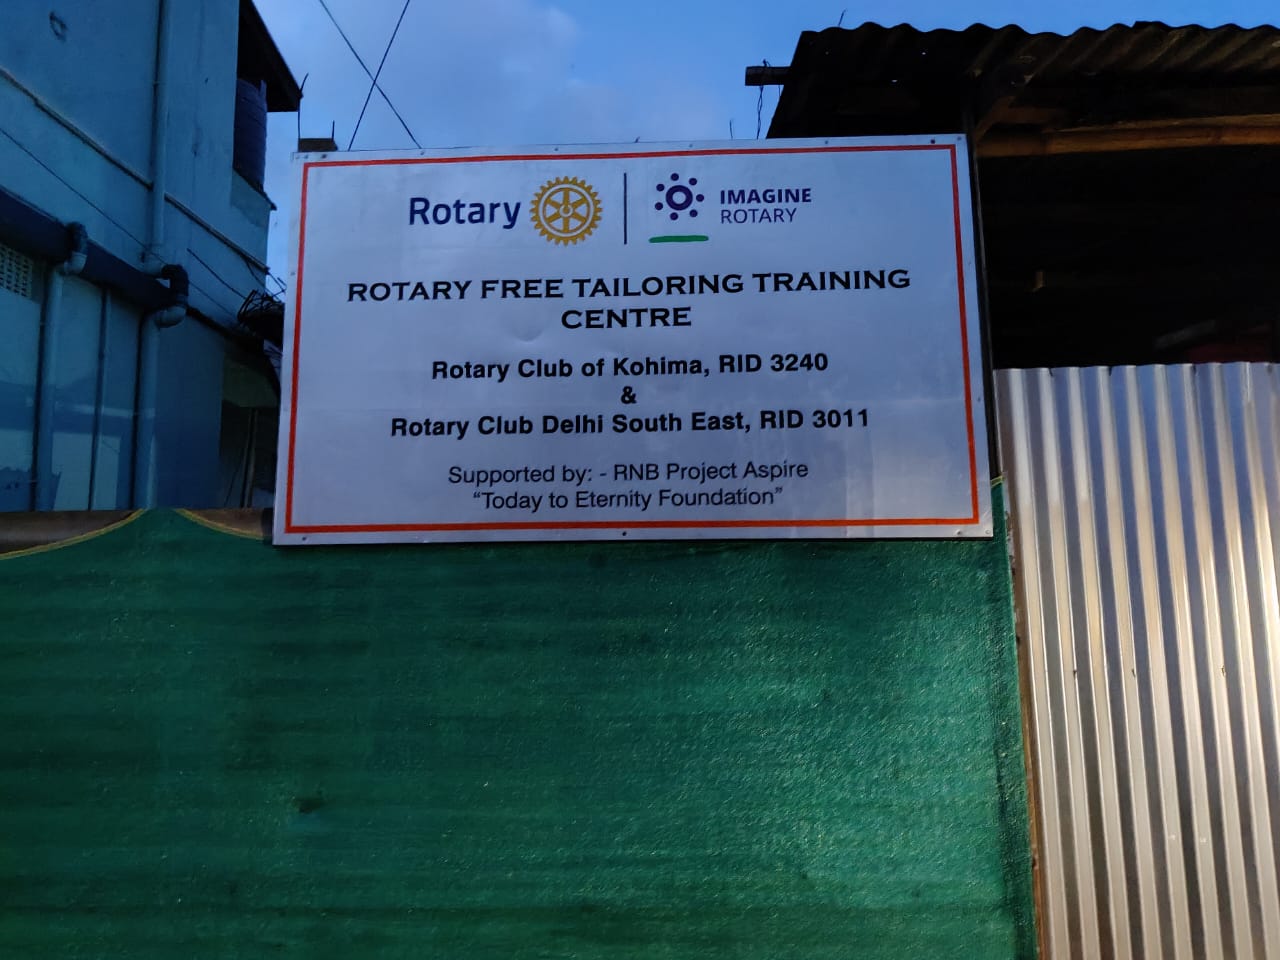 Rotary Free Tailoring Training Centre